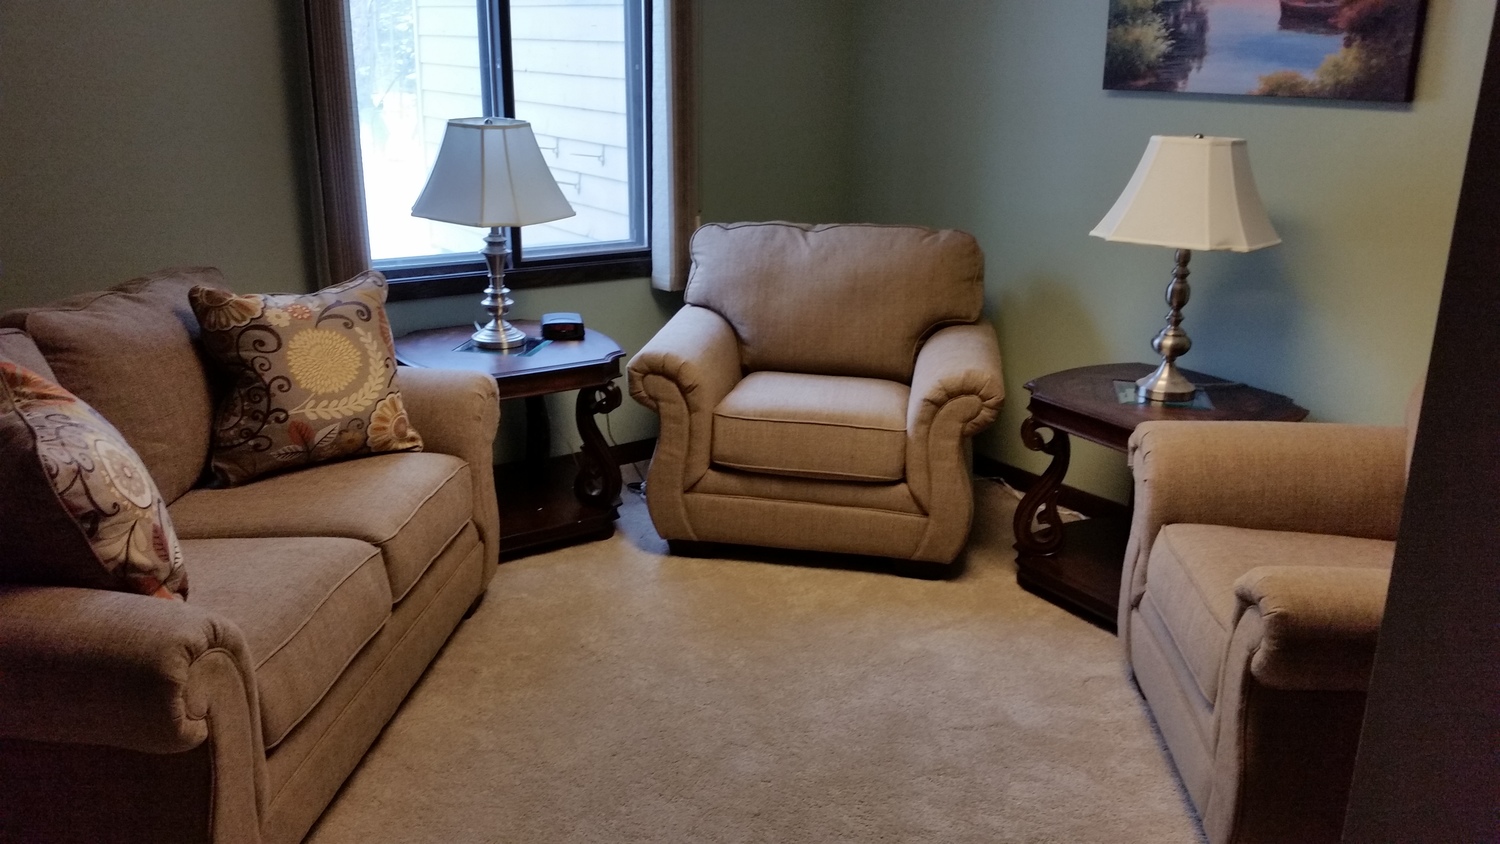 Gallery Photo of Whispers of Grace Therapy Room